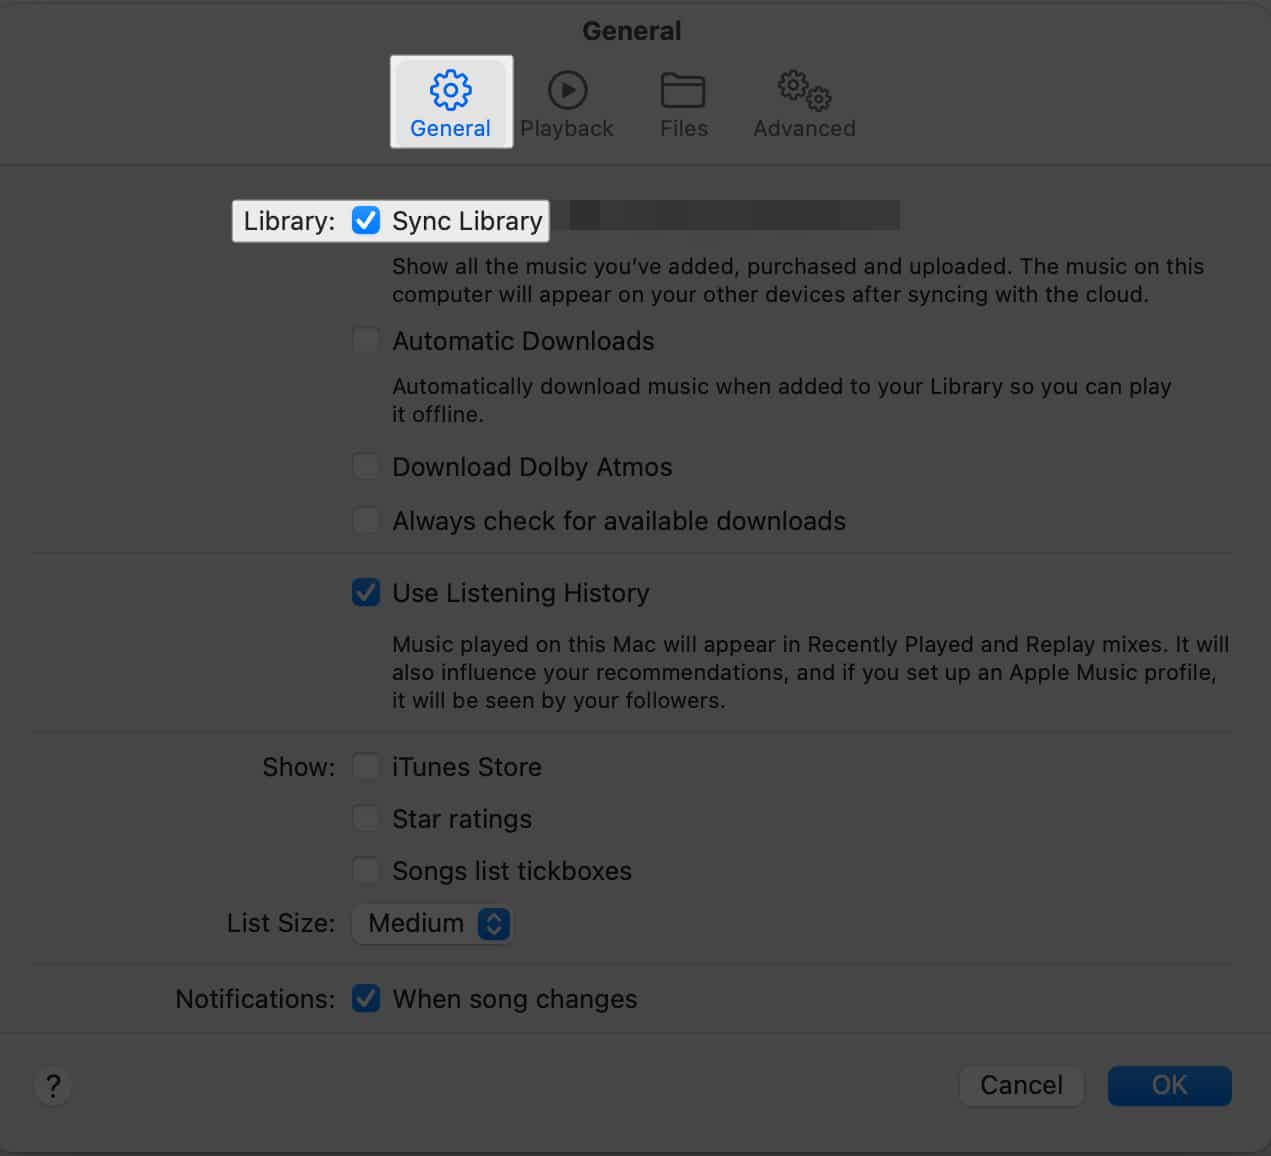 Under General, check the box next to Sync Library.